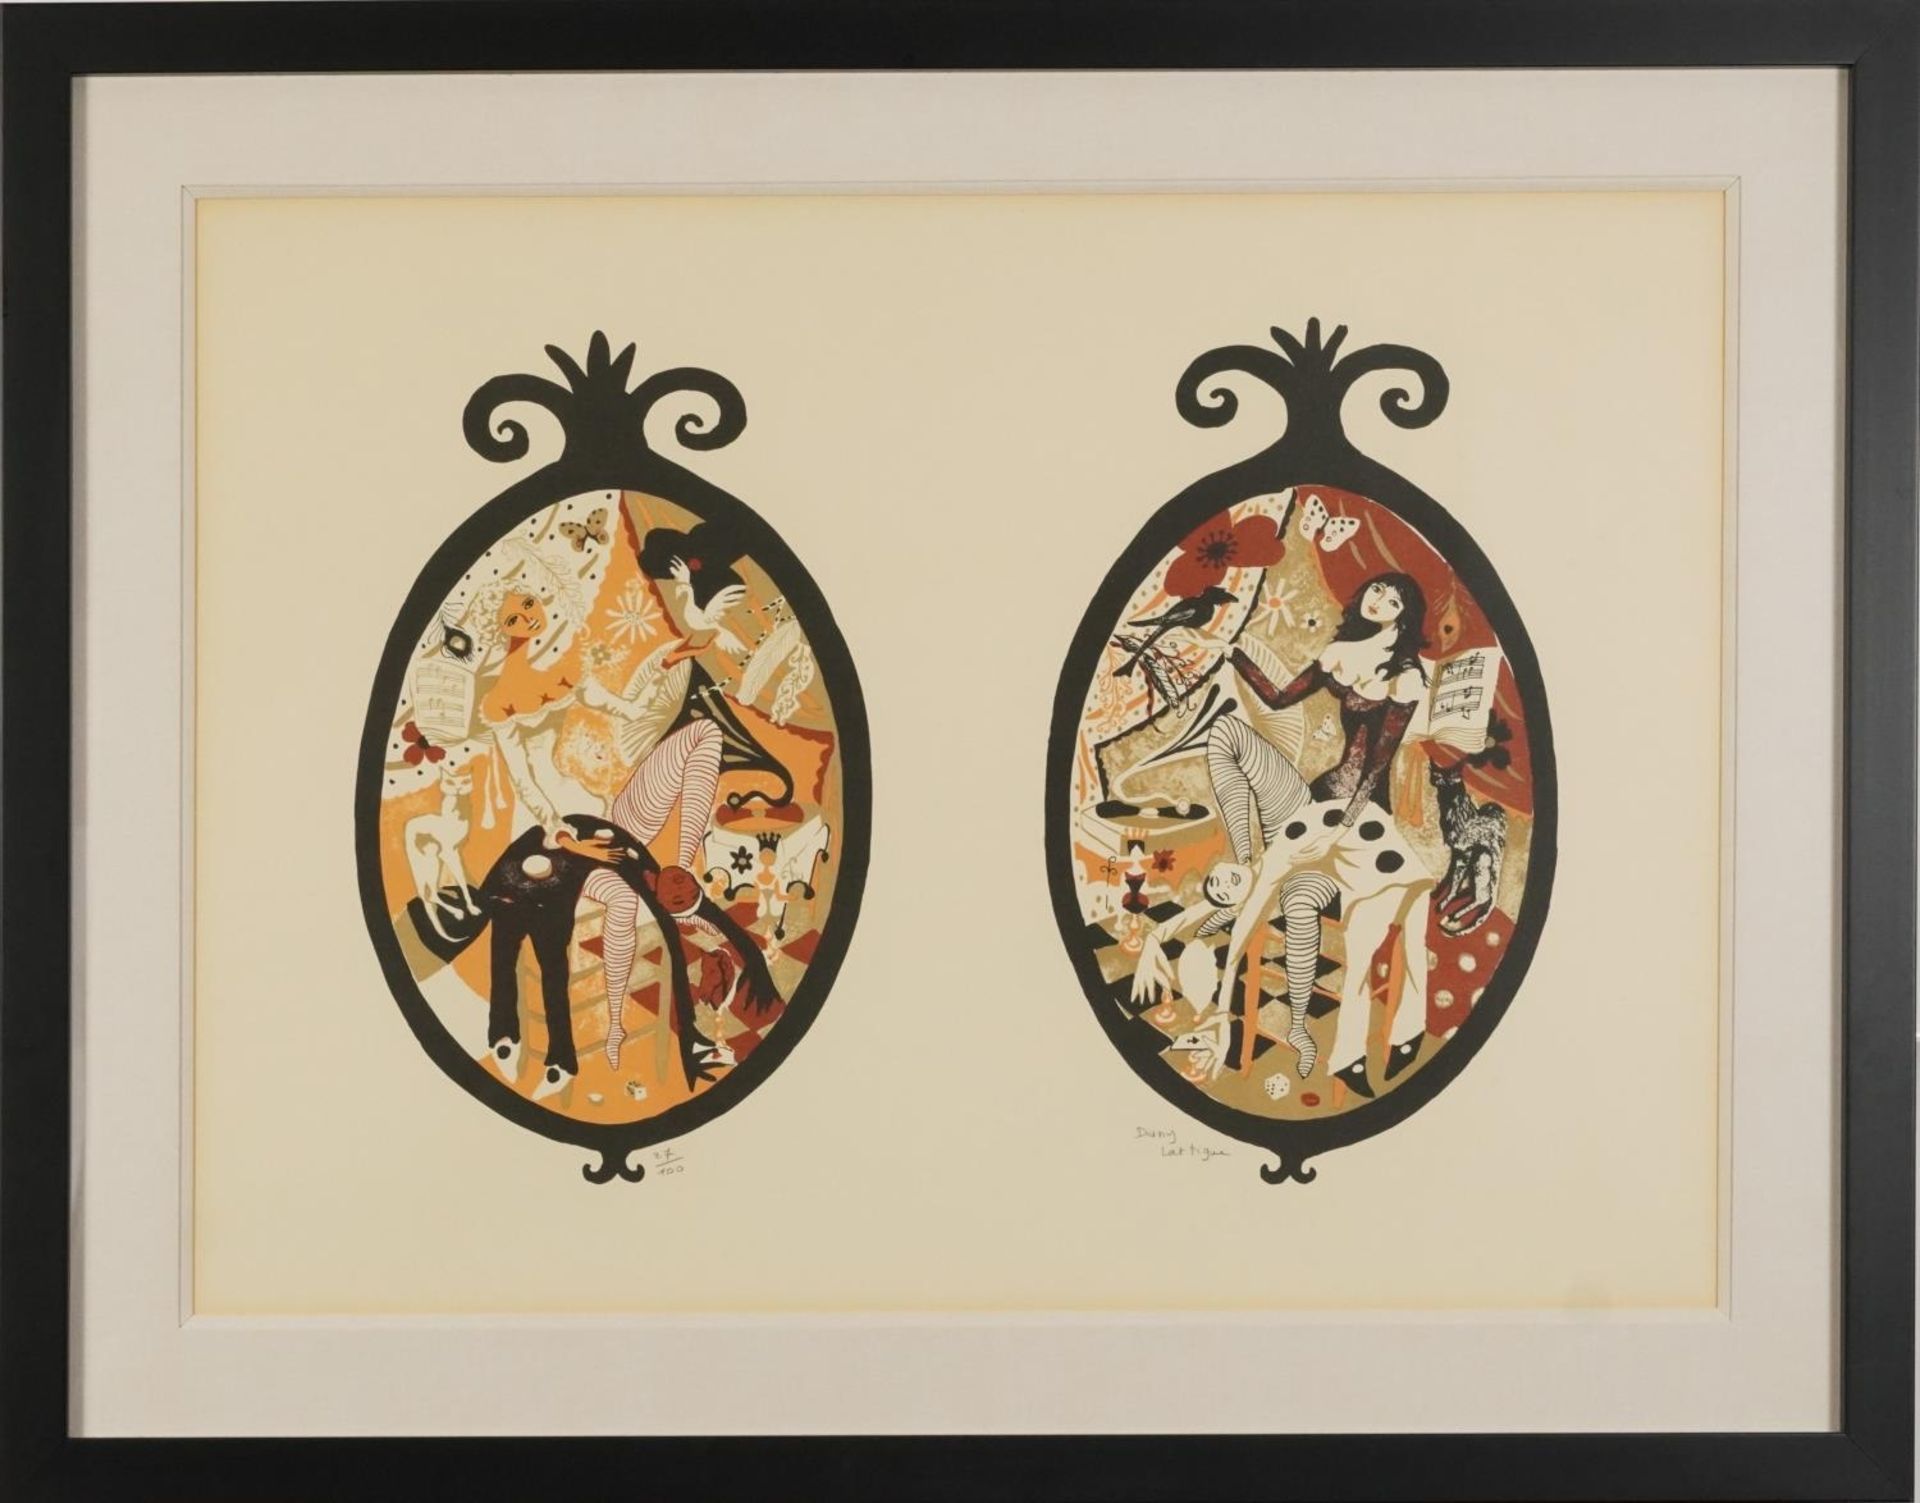 Dany Lartigue - Theatrical Performers, pencil signed print in colour, limited edition 27/100, - Image 2 of 5